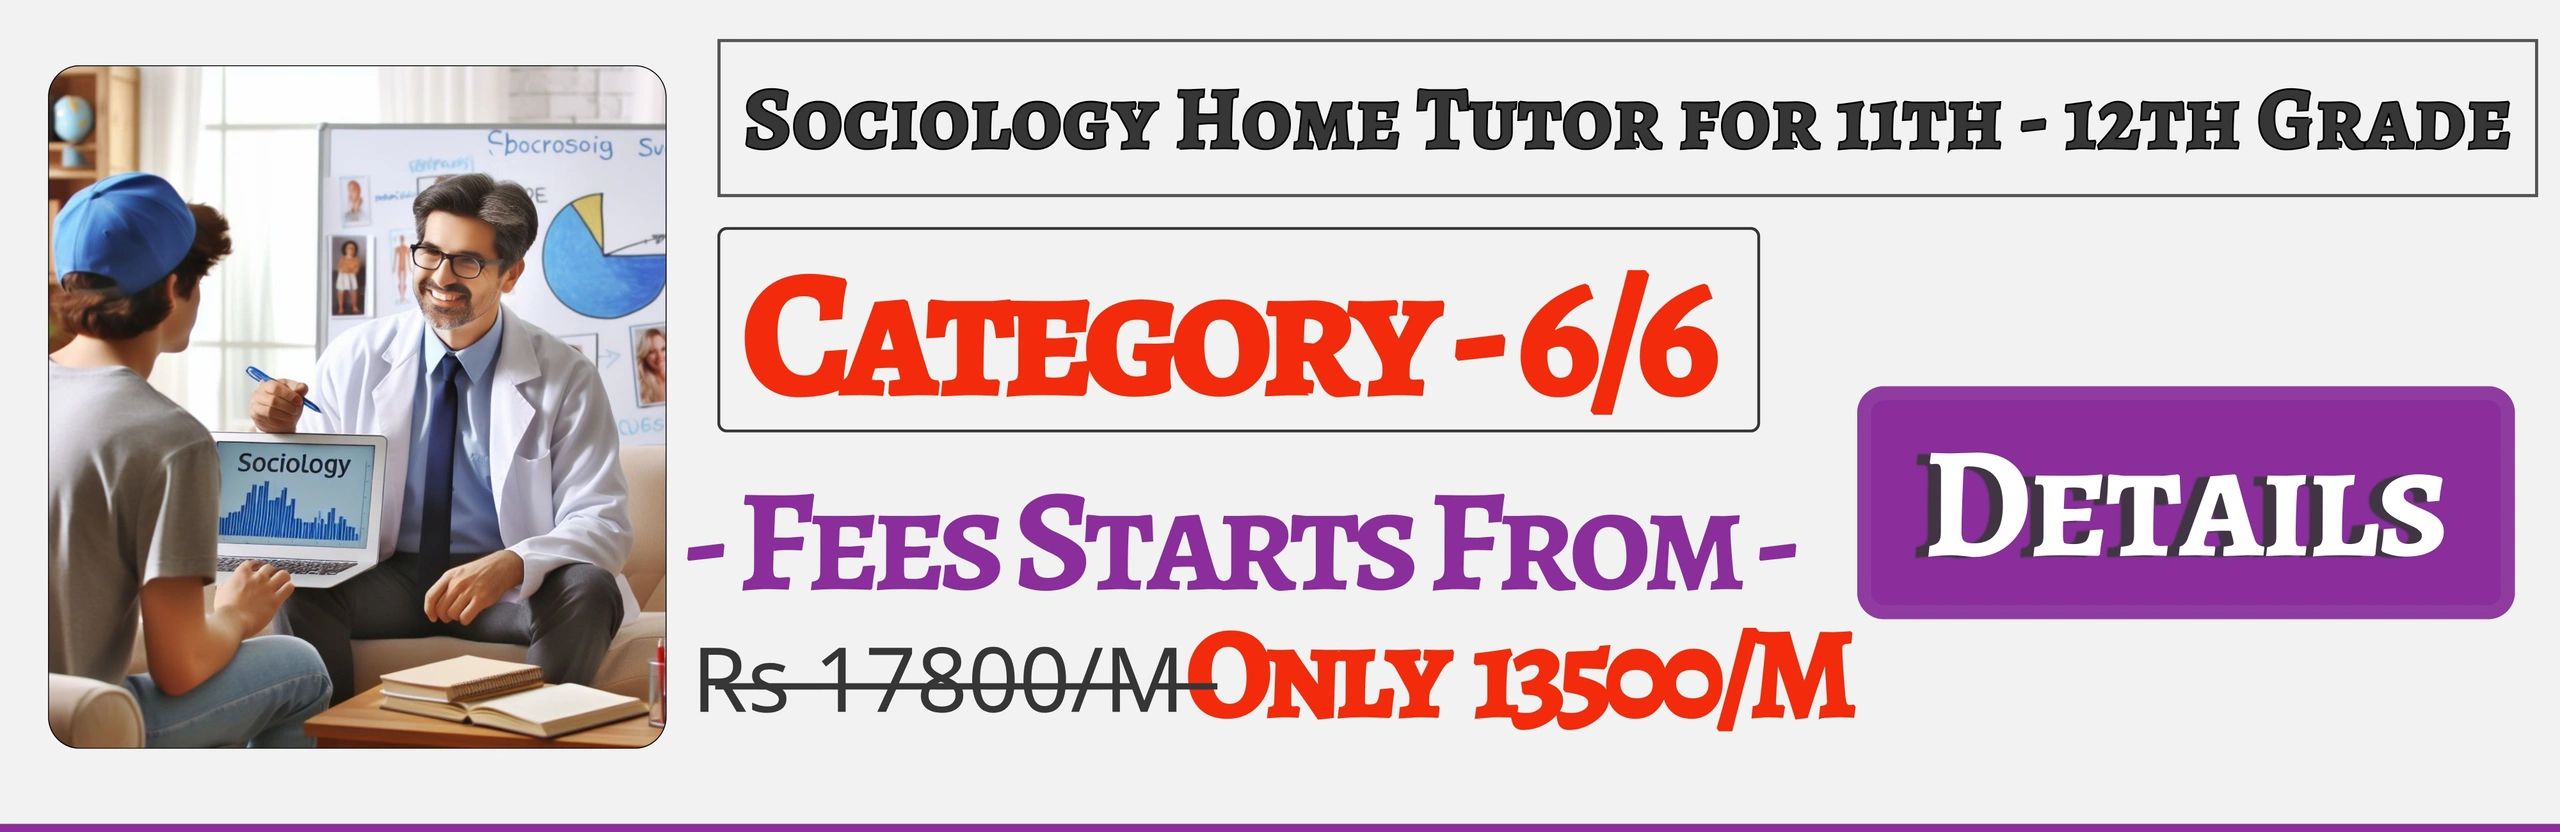 Book Best Nearby Sociology Home Tuition Tutors For 11th & 12th In Jaipur , Fees Only 13500/M